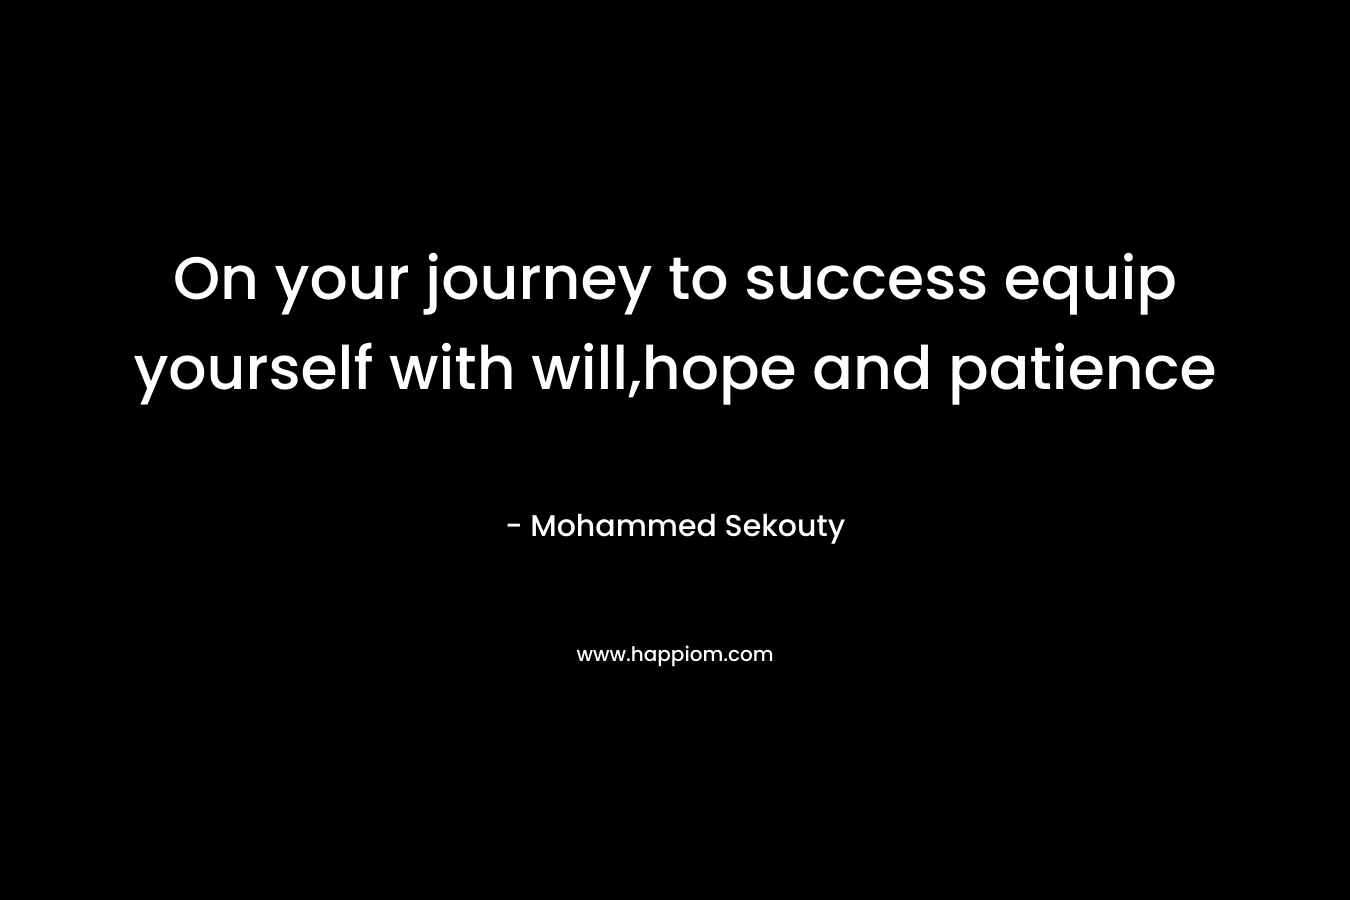 On your journey to success equip yourself with will,hope and patience